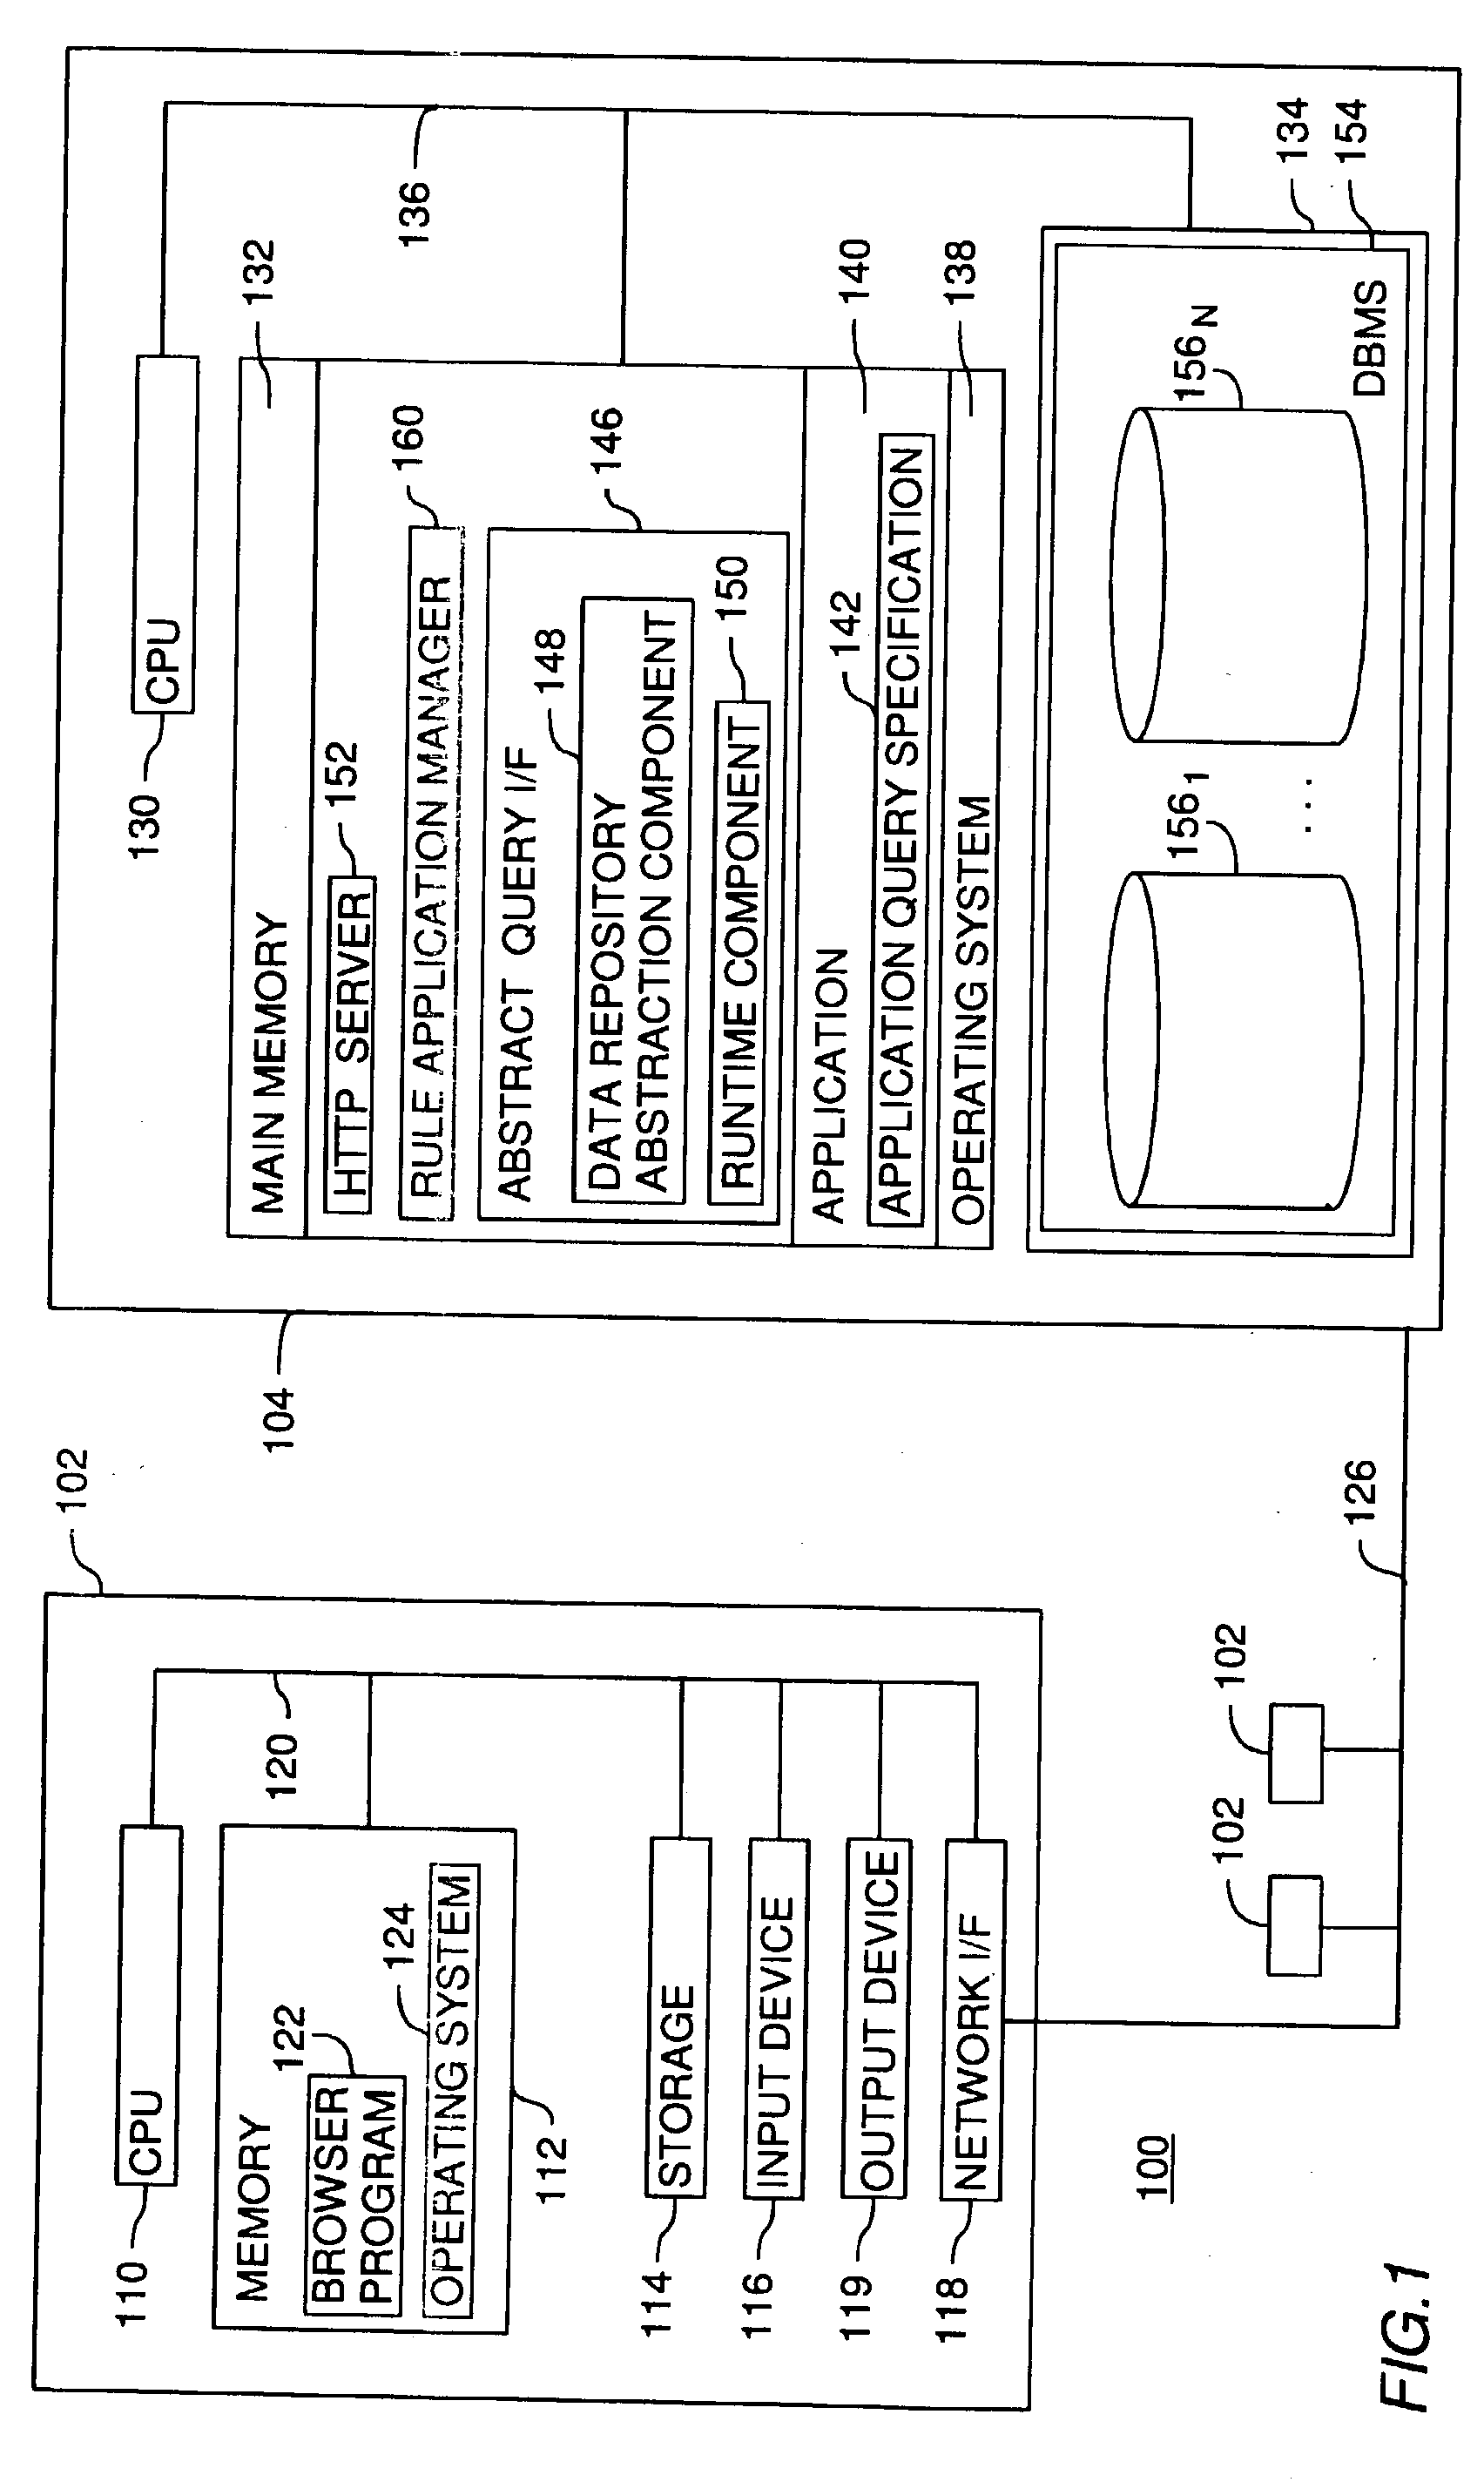 Method for restricting queryable data in an abstract database